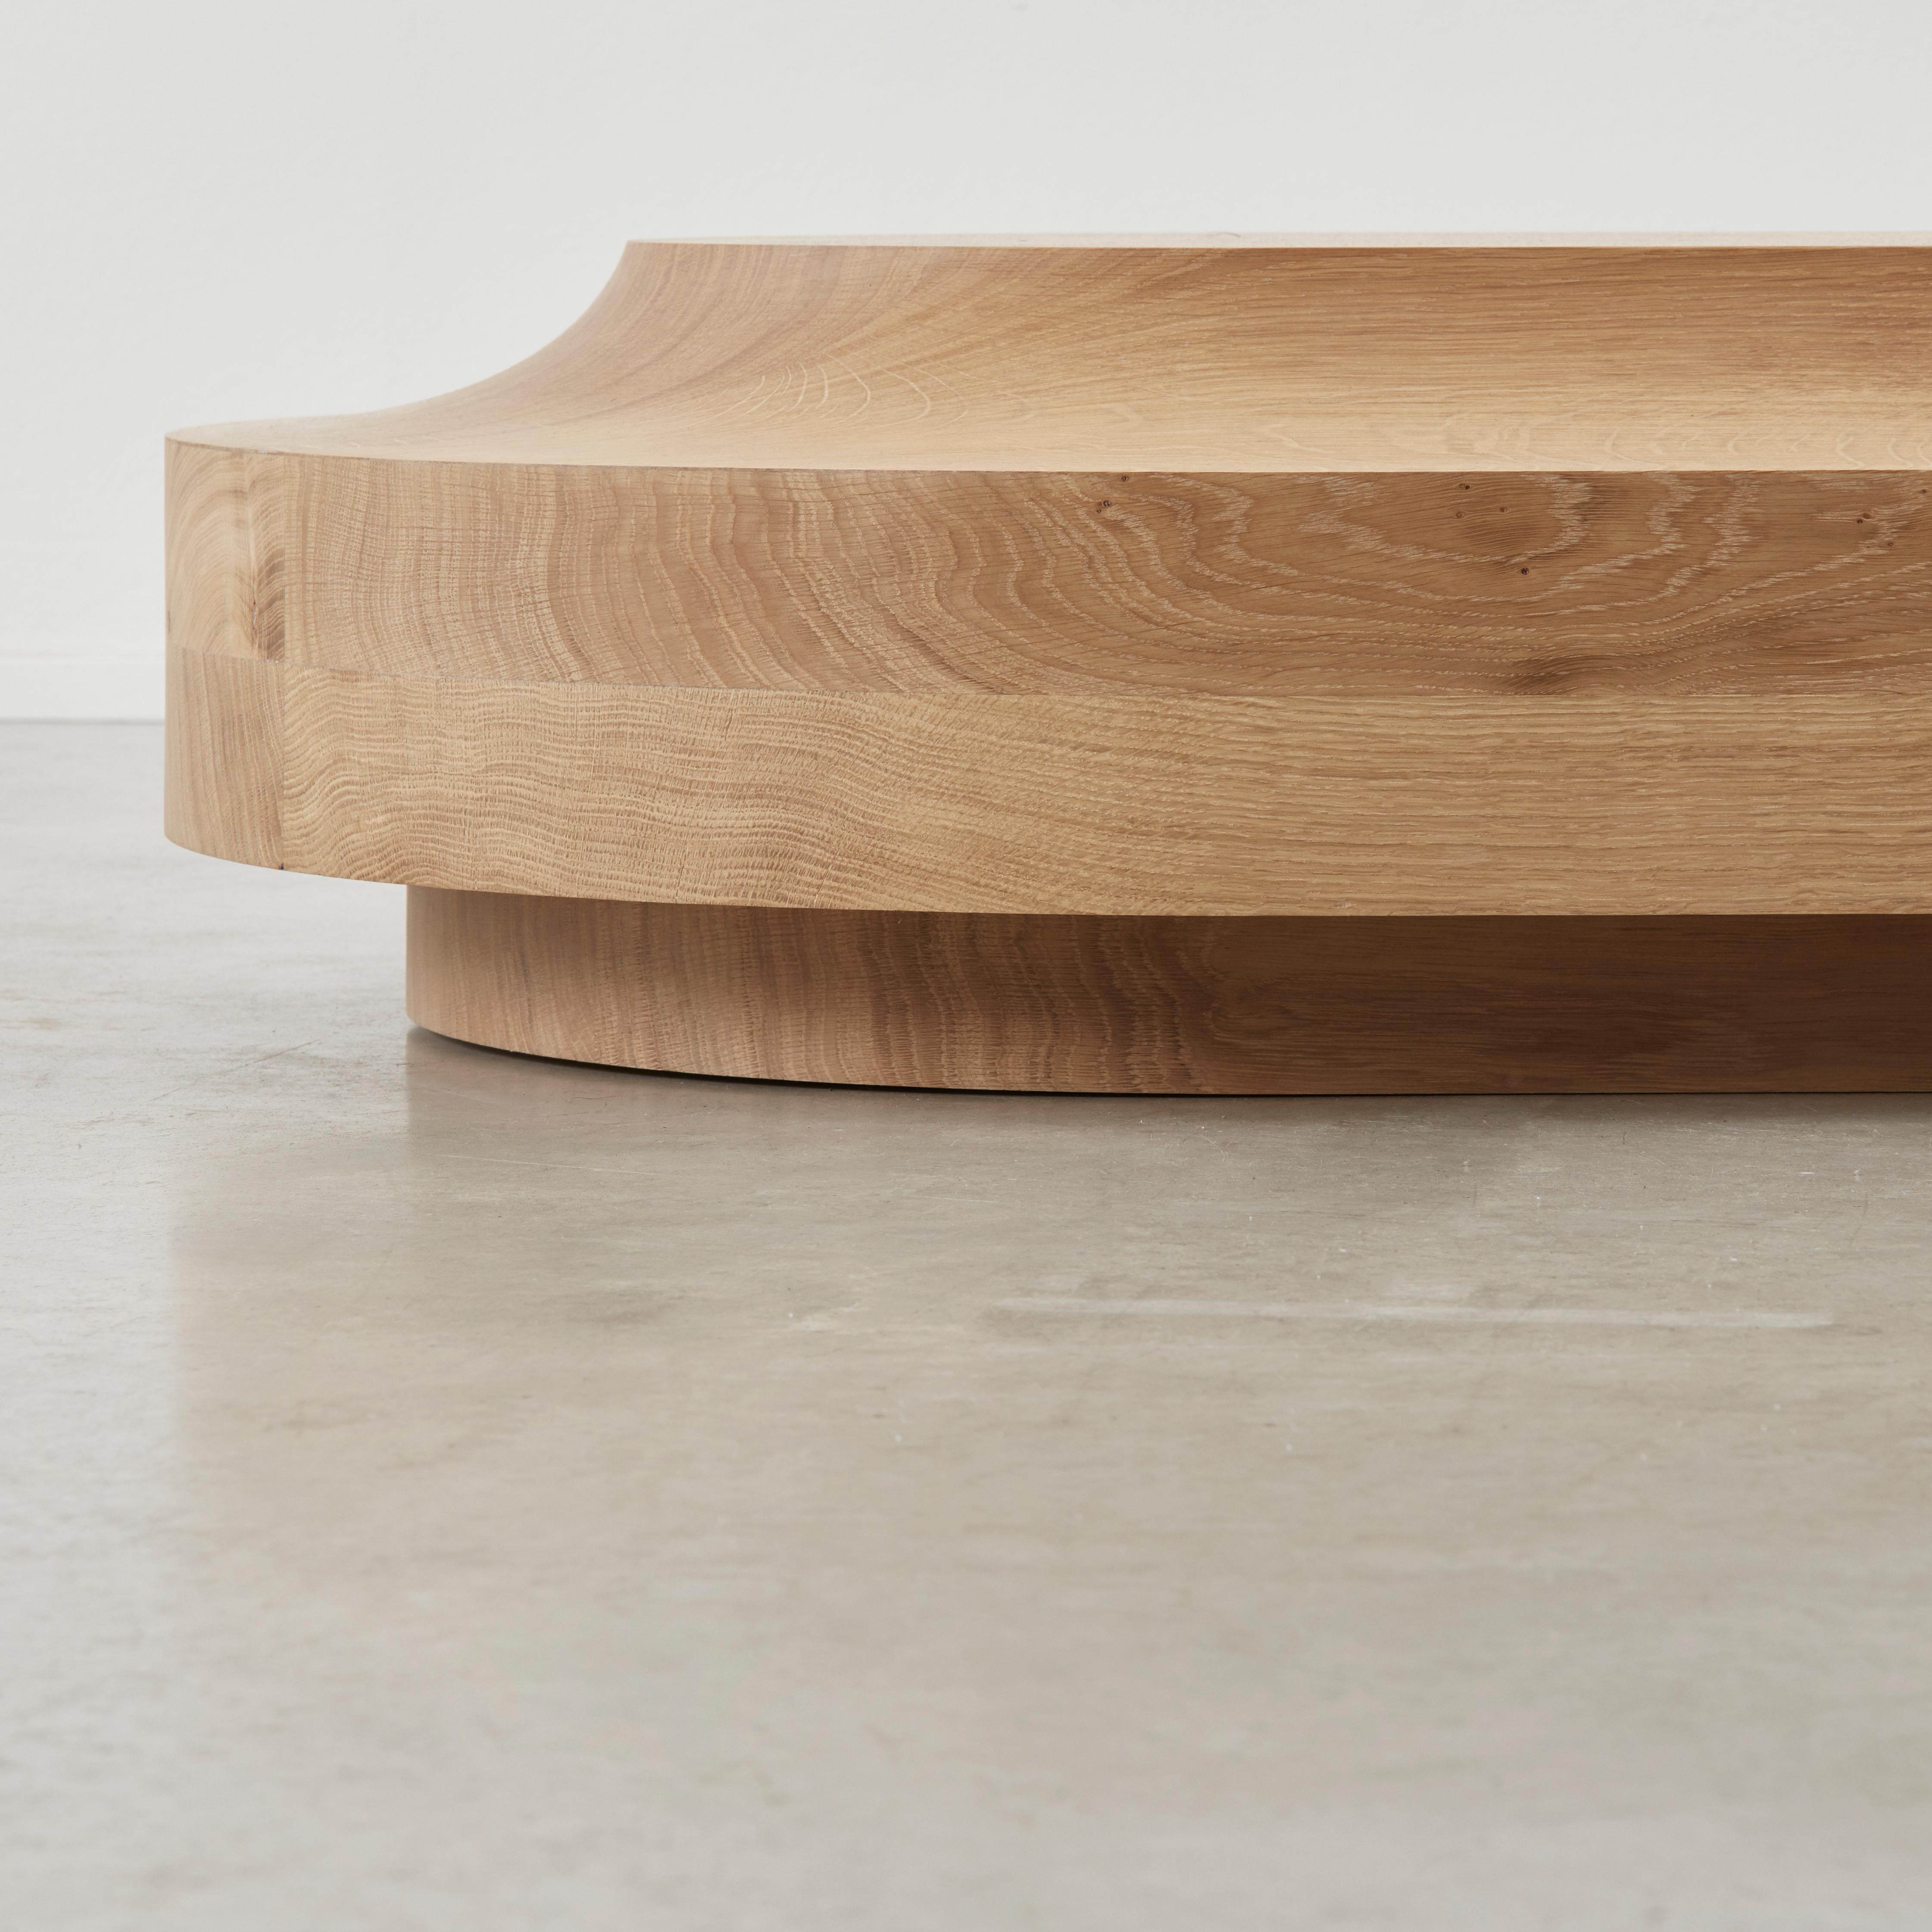 Benni Allan 'Low Table One' in oak by EBBA, UK, 2022 For Sale 7